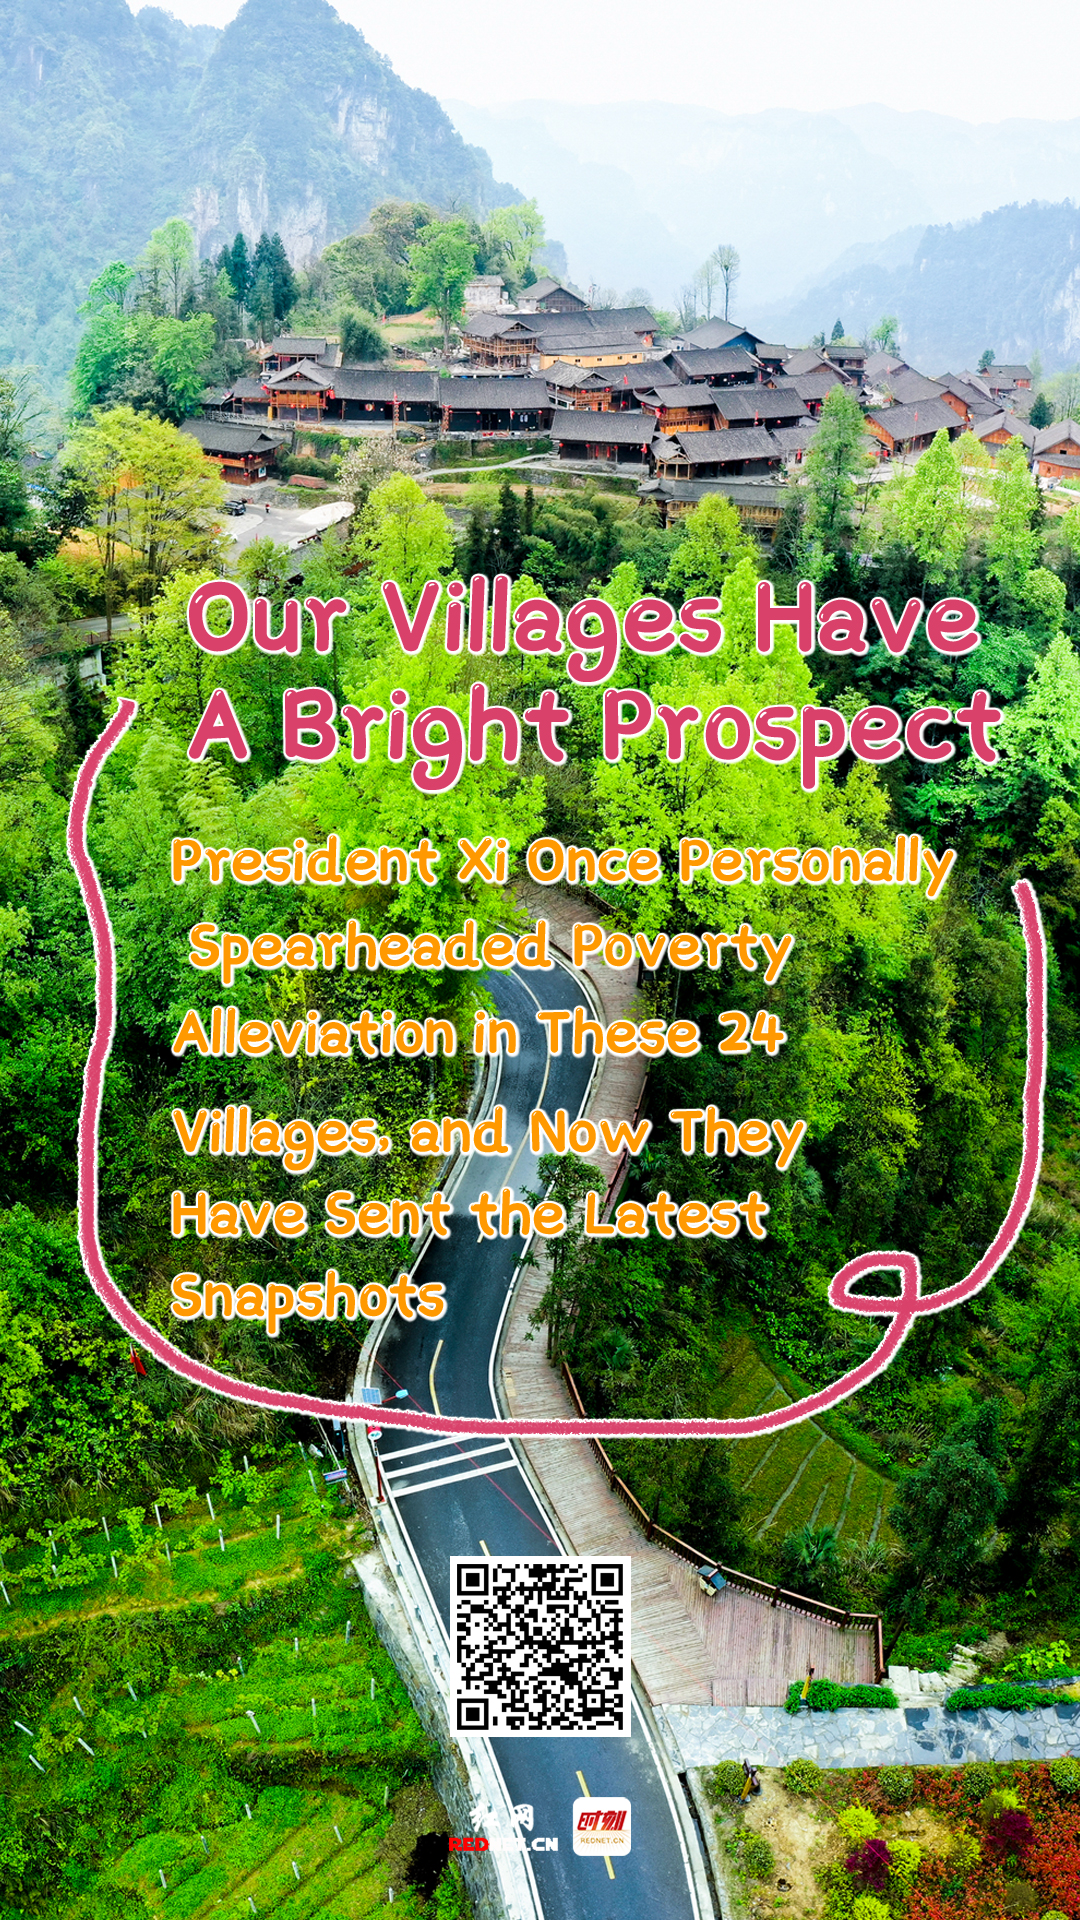 Our Villages Have A Bright Prospect